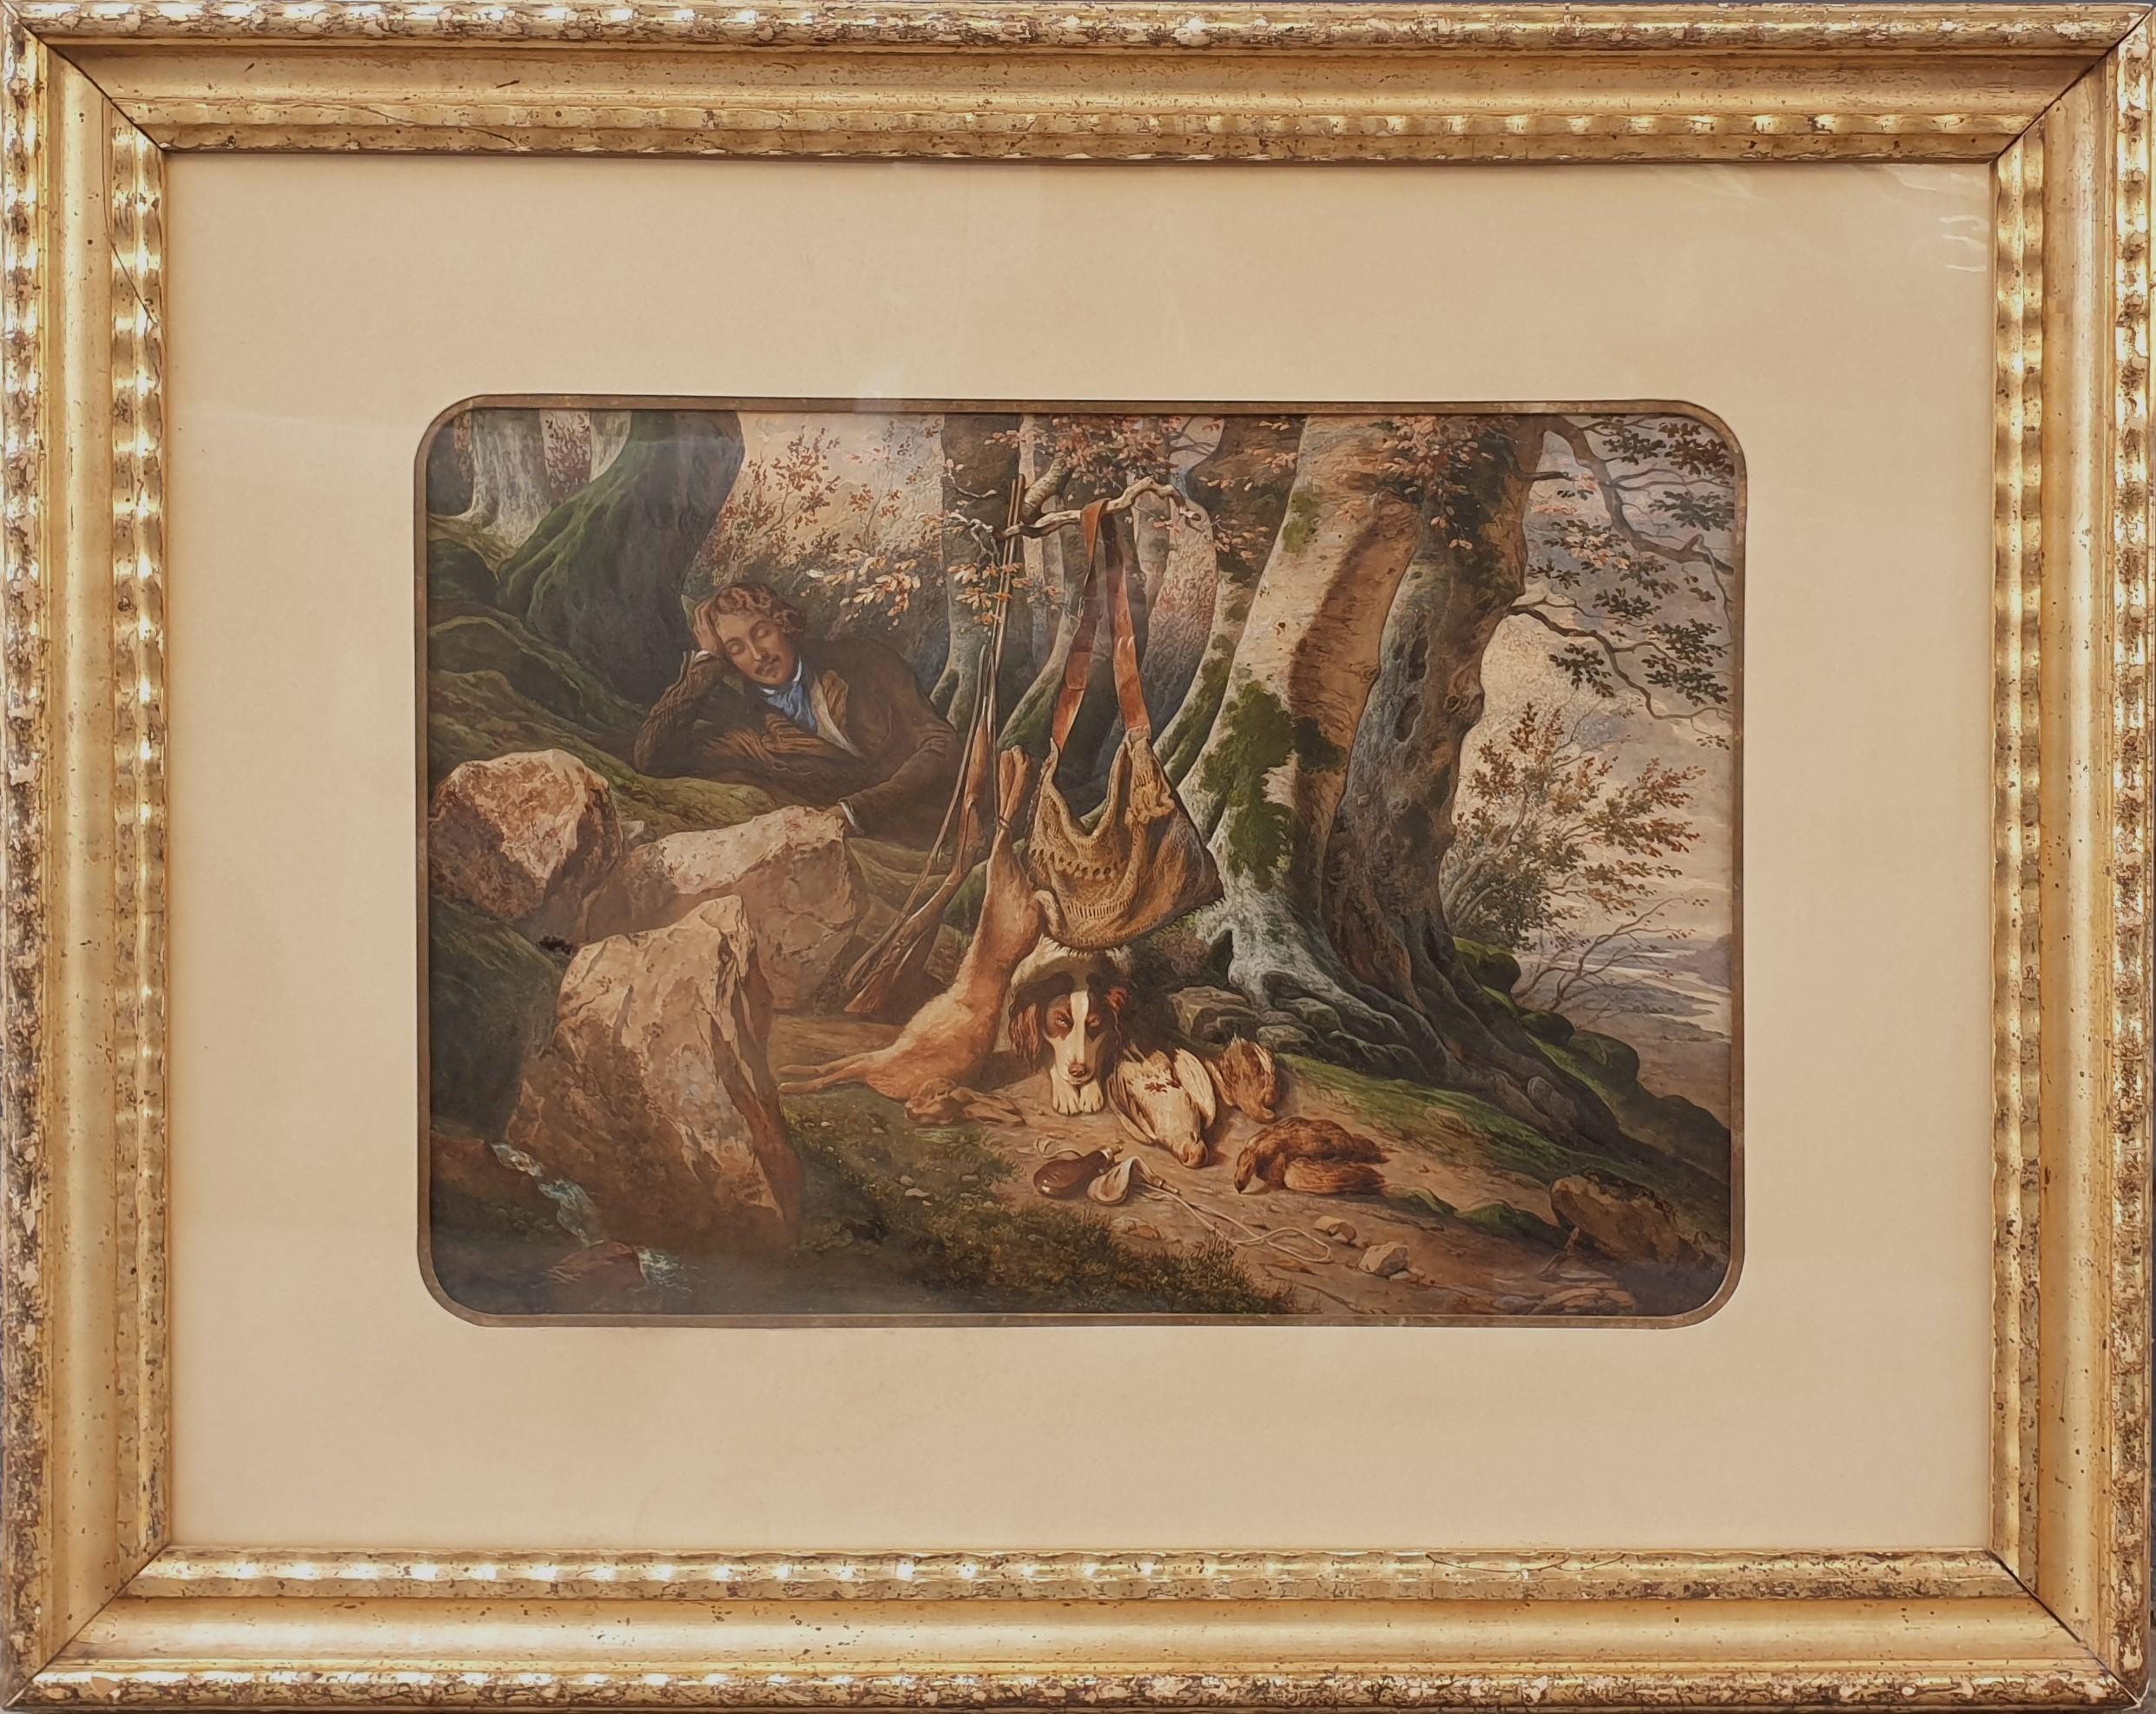 A. GUILLAUME Landscape Painting - Watercolor French school mid 18th romantic Hunt dog hunter game forest 